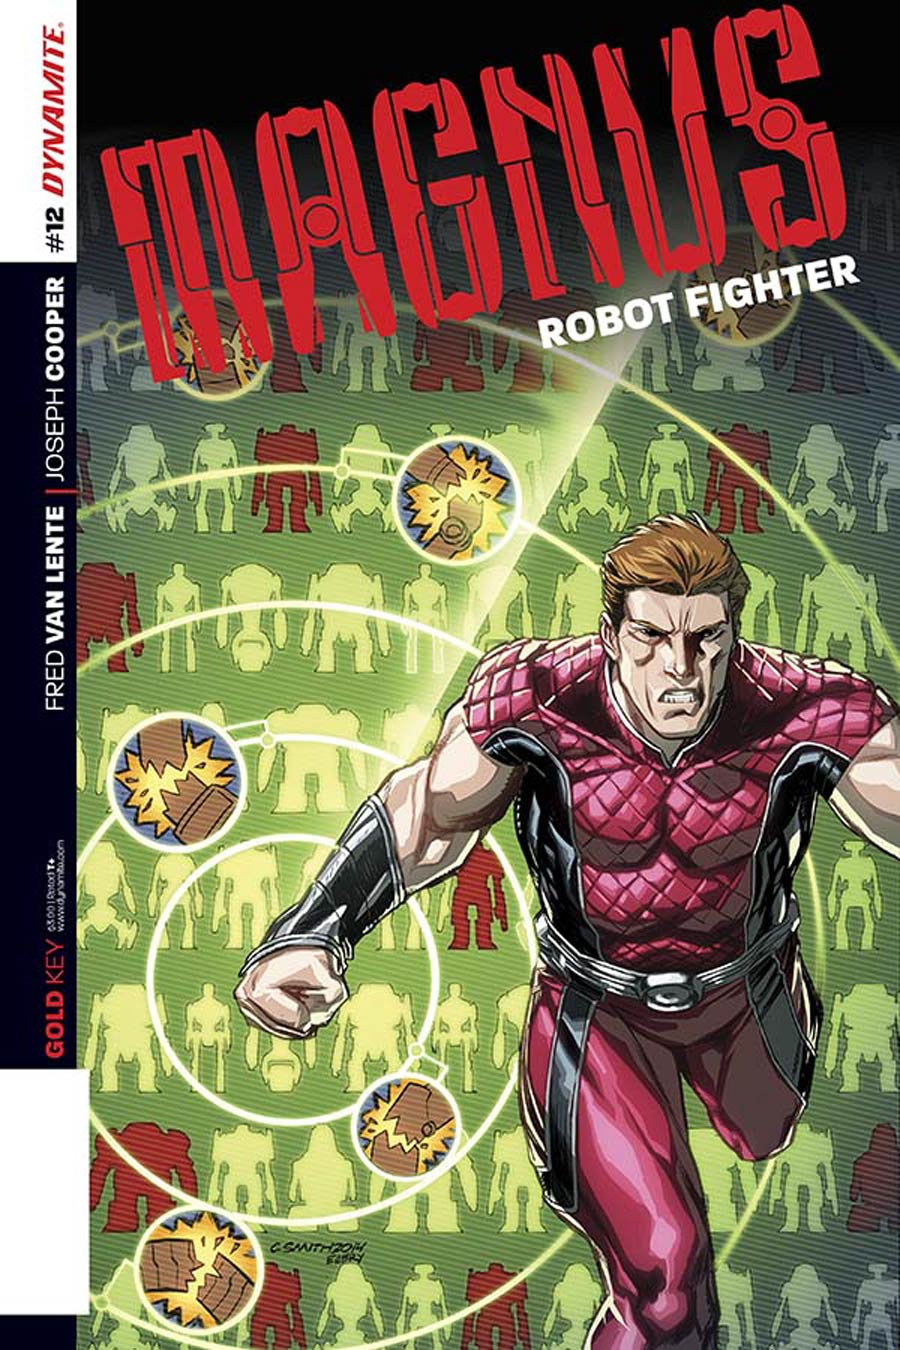 Magnus Robot Fighter Vol 4 #12 Cover B Variant Cory Smith Subscription Cover